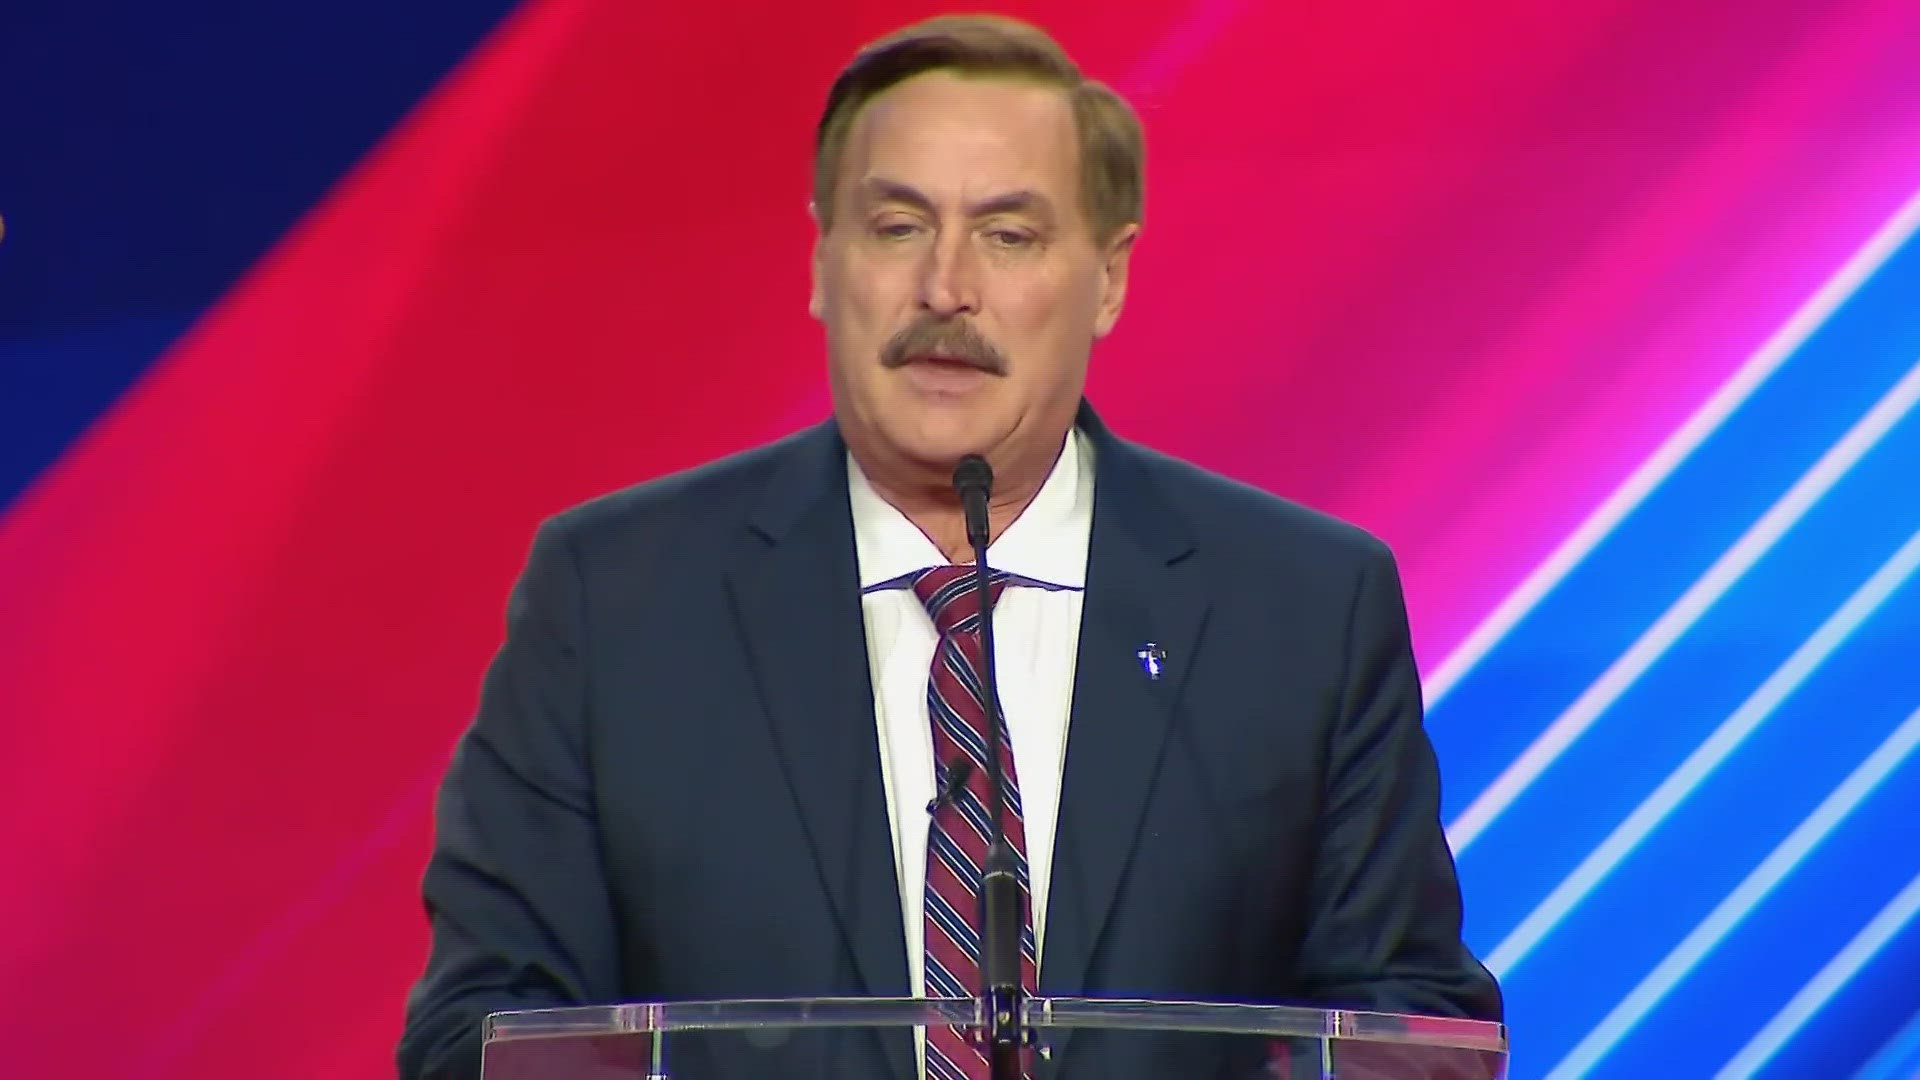 Mike Lindell offered $5 million to anyone who could debunk data he said proved there was fraud in the 2020 election. Now he has to pay up.